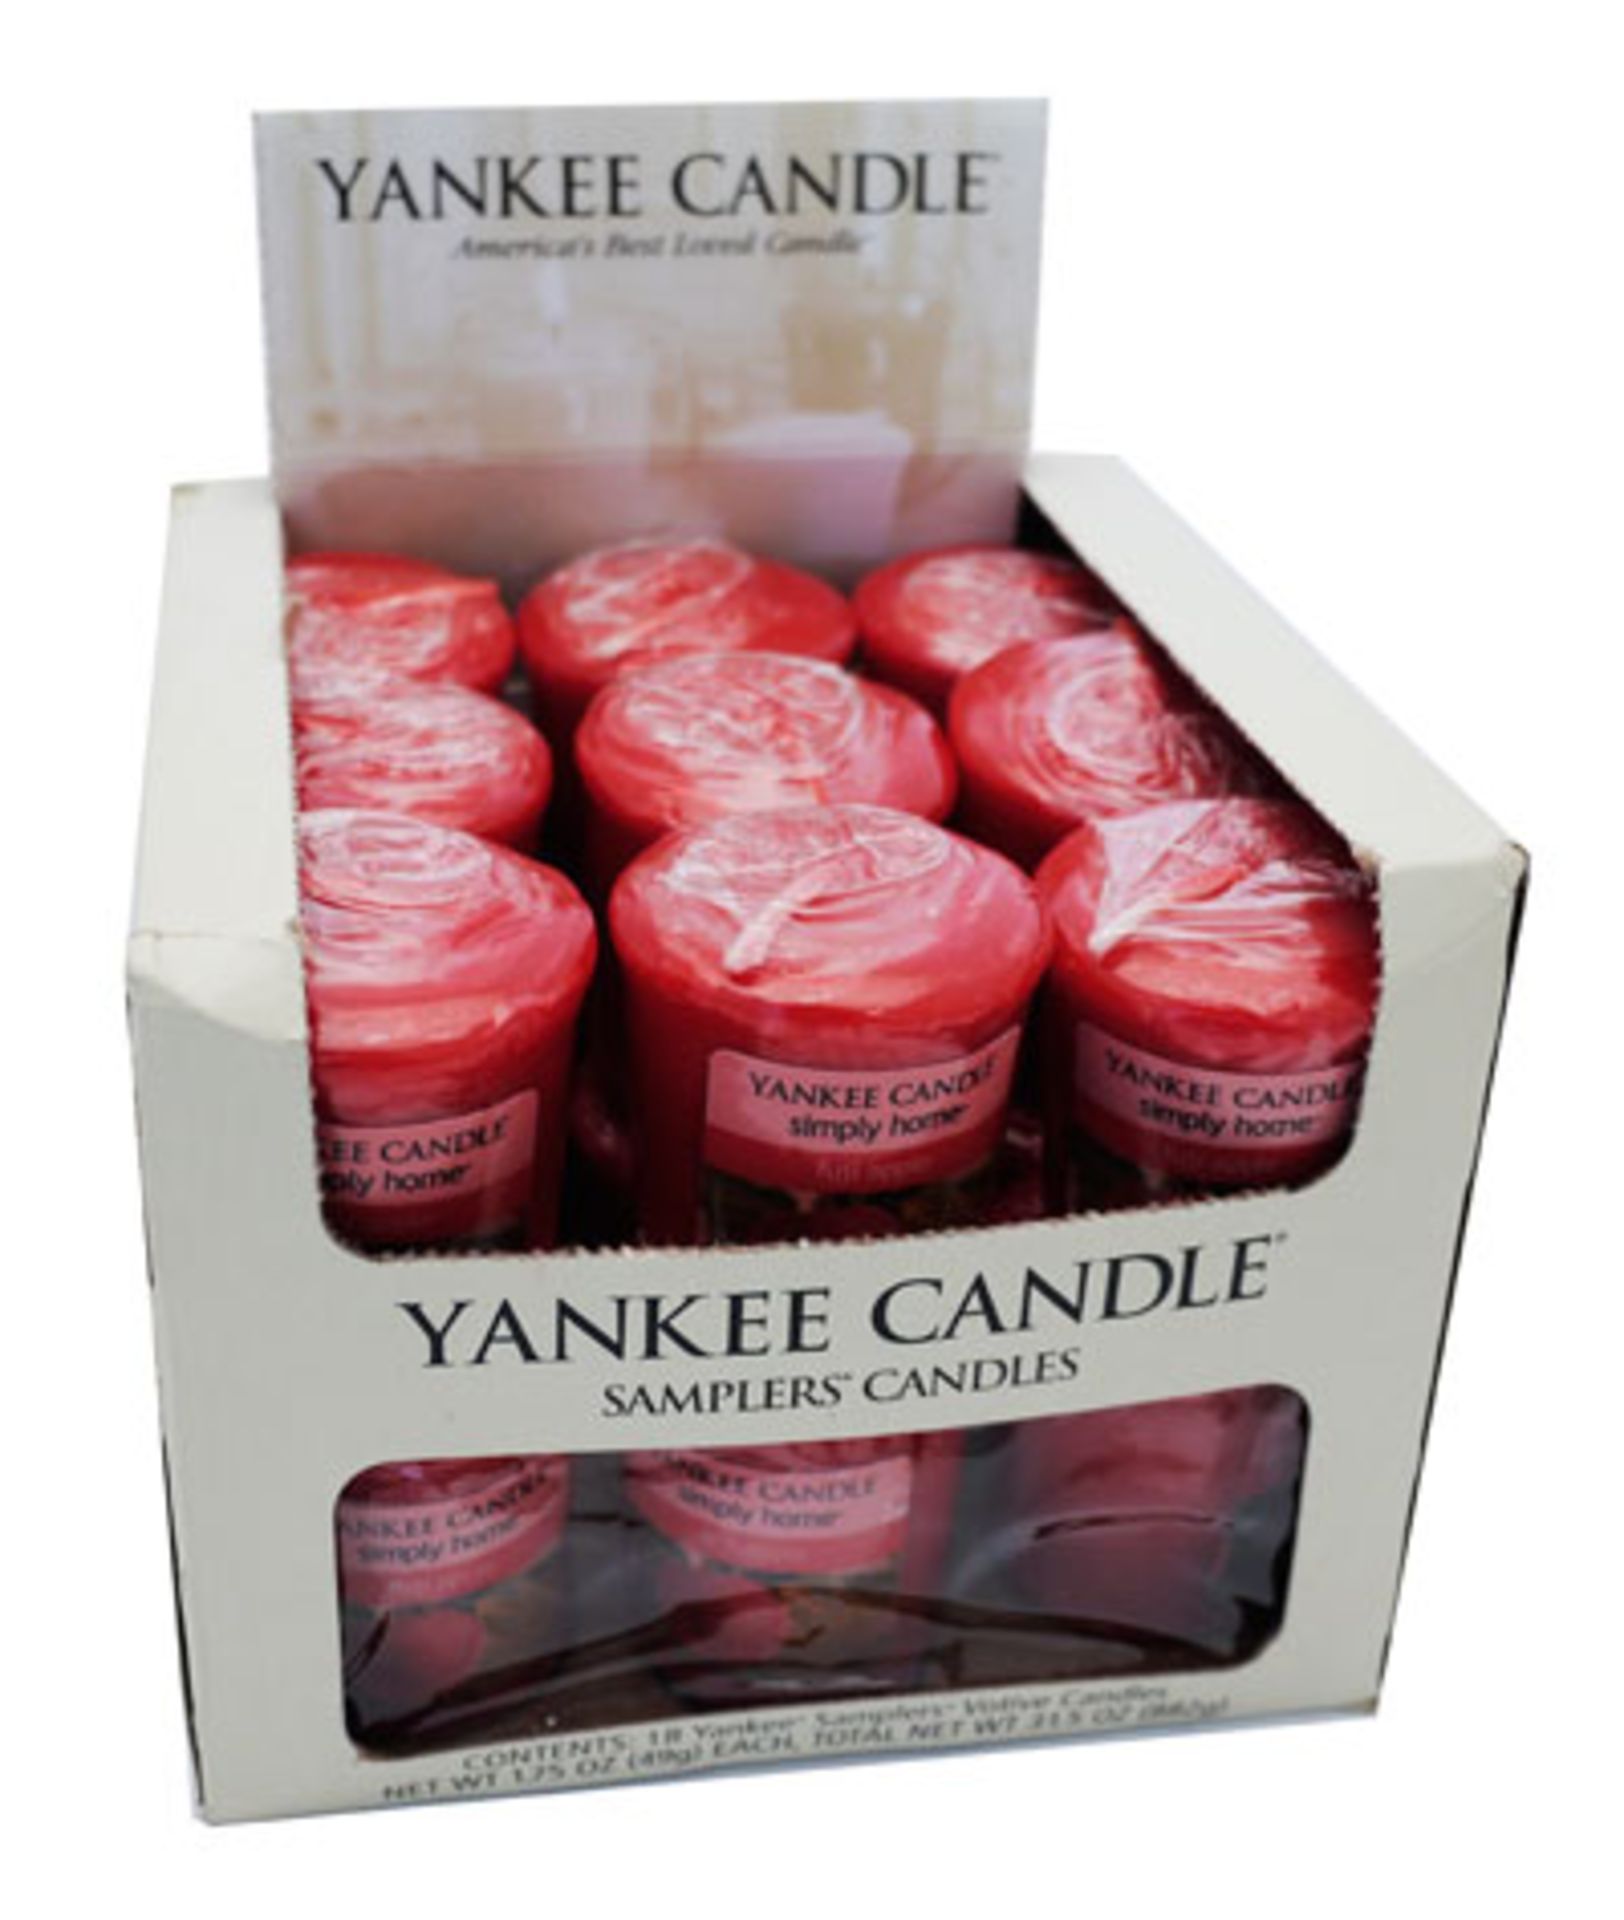 V *TRADE QTY* Brand New 18 x Yankee Candle Votive Fuji Apple 49g Total Amazon Price £72.00 X 40 YOUR